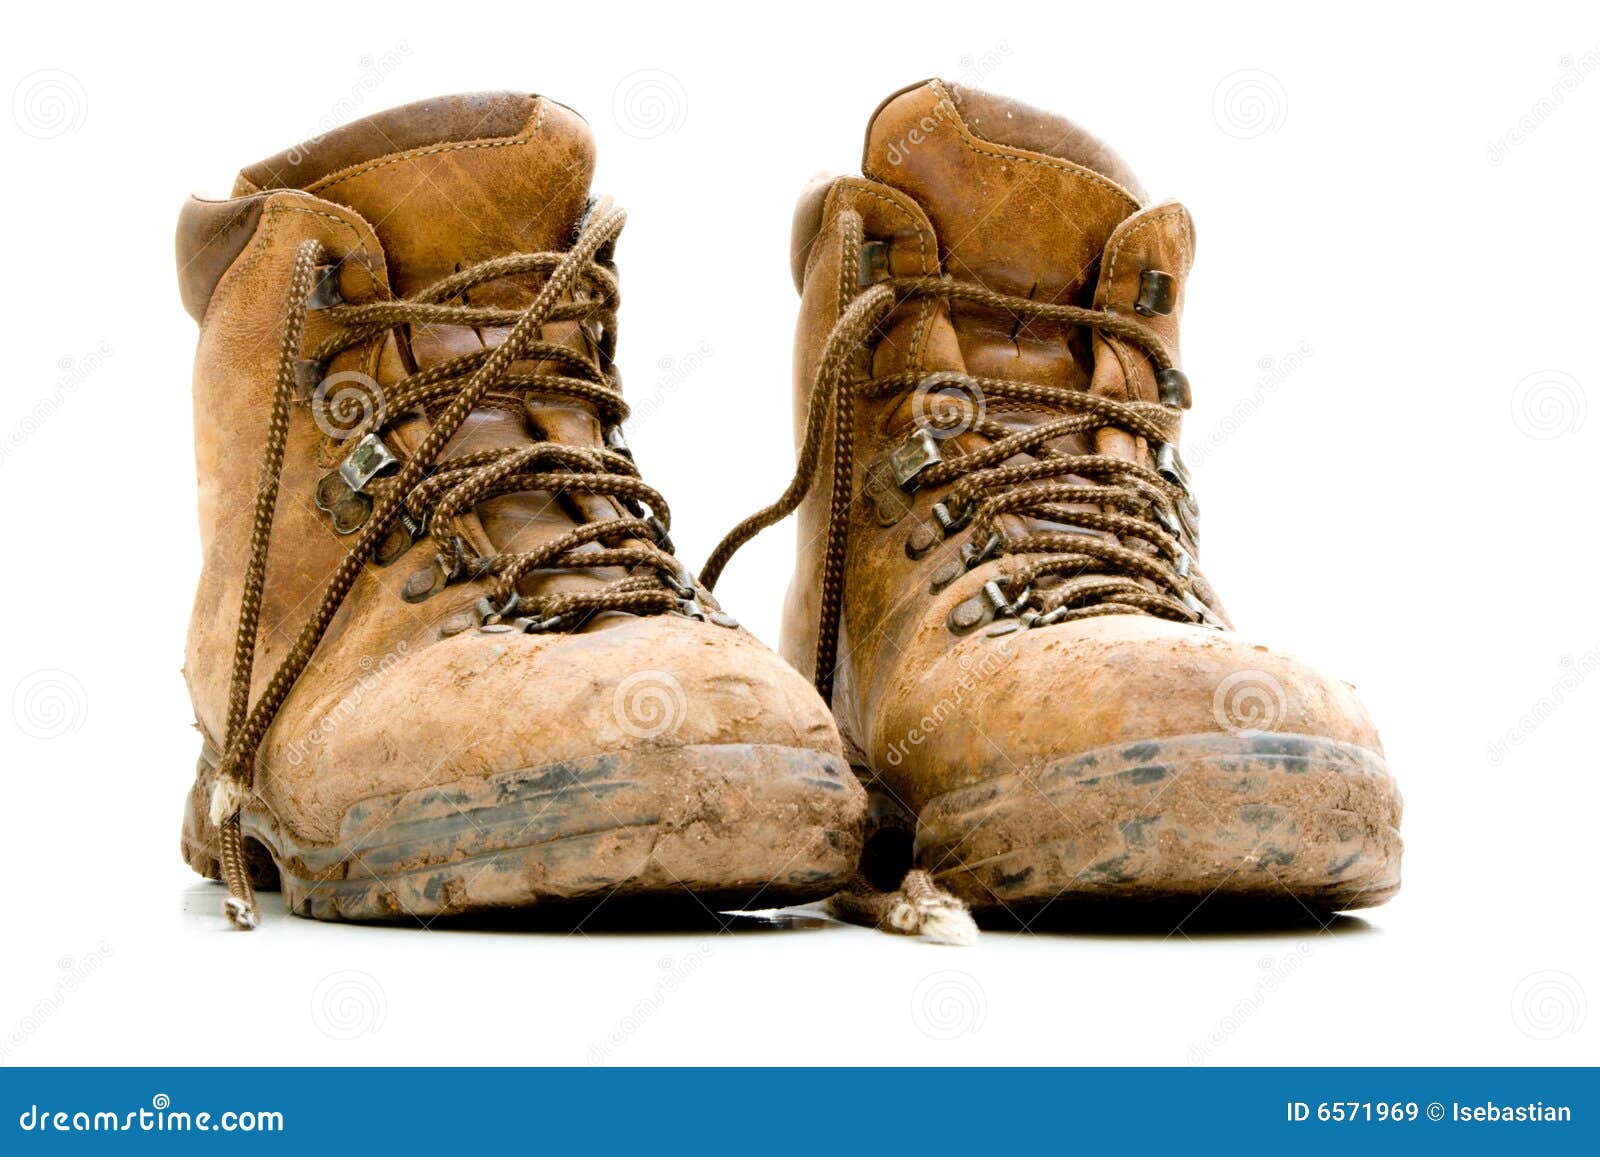 Pair Of Old Worn Walking Boots Royalty Free Stock Images - Image: 6571969